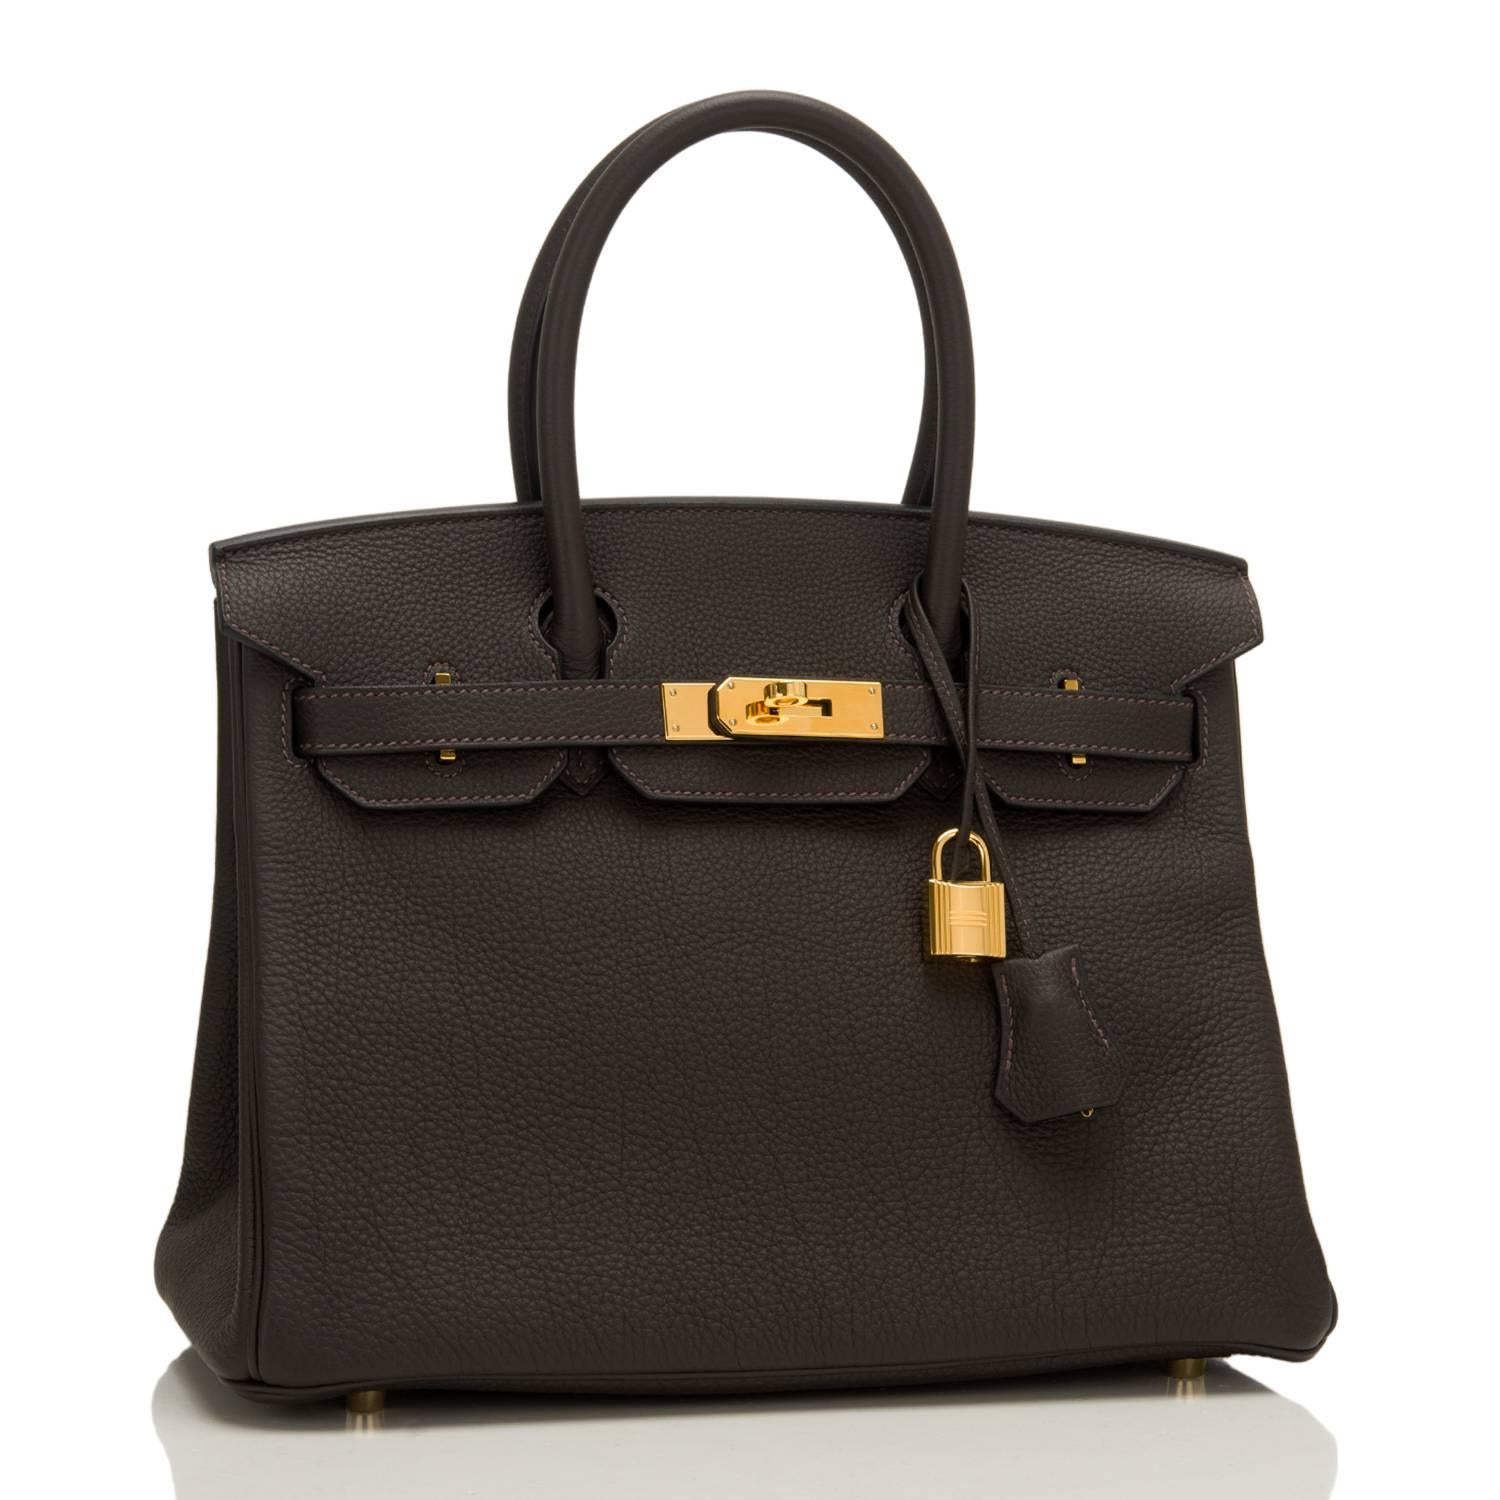 Hermes Macassar (Ebony) Birkin 30cm of Togo leather with gold hardware.

This Birkin has tonal stitching, a front toggle closure, a clochette with lock and two keys, and double rolled handles.

The interior is lined with Macassar chevre and has one